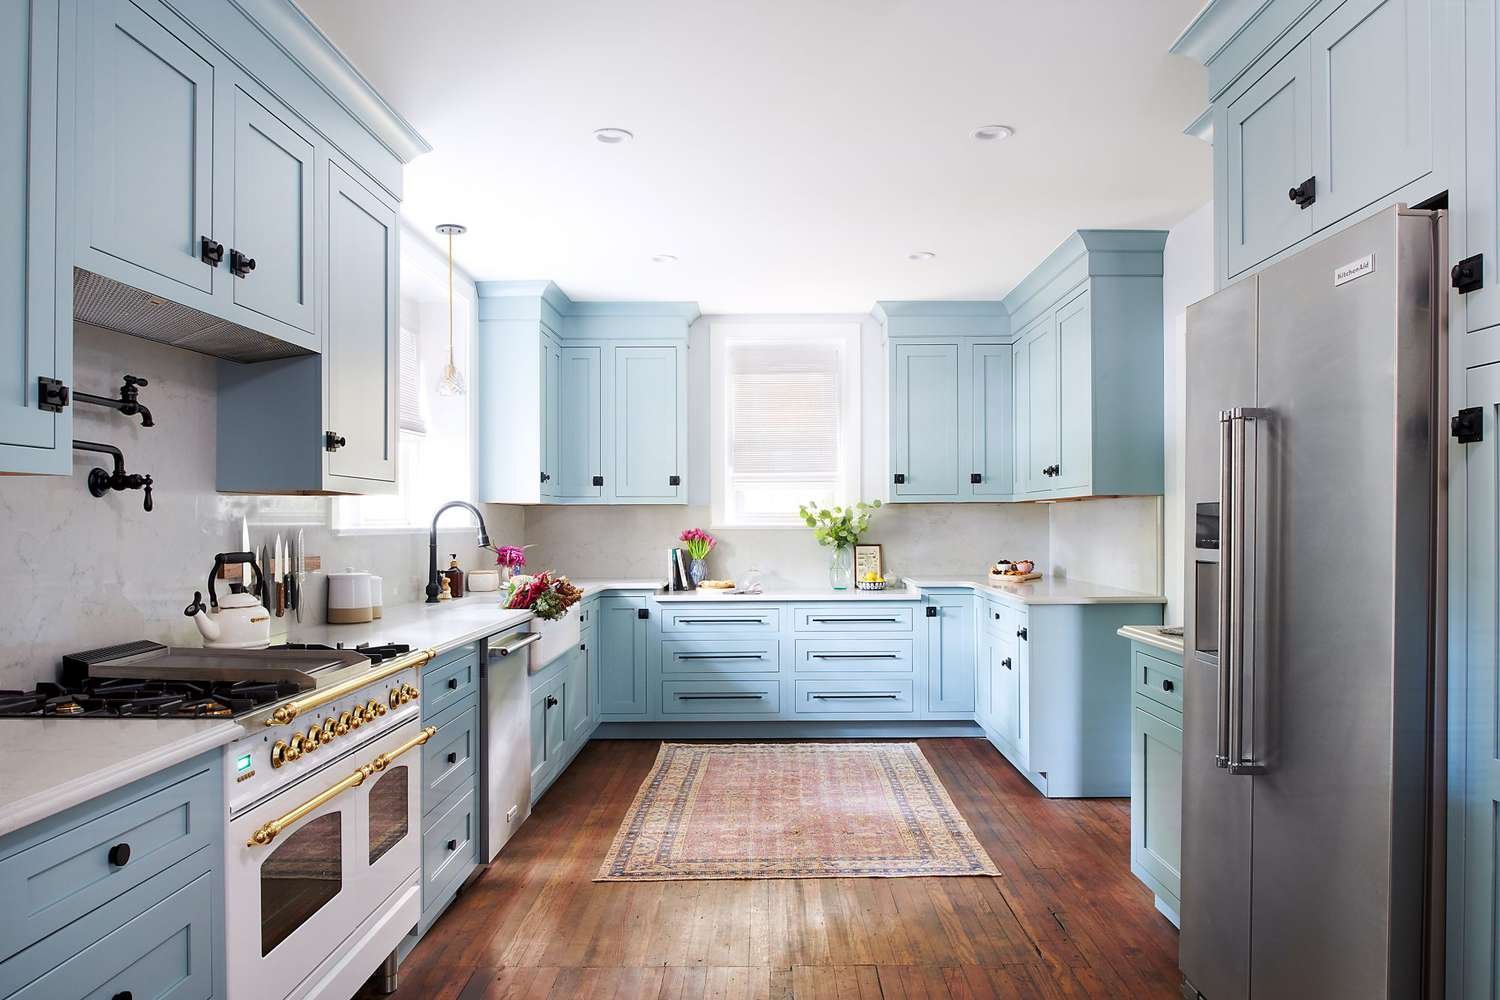 How to Choose the Right Kitchen Colors